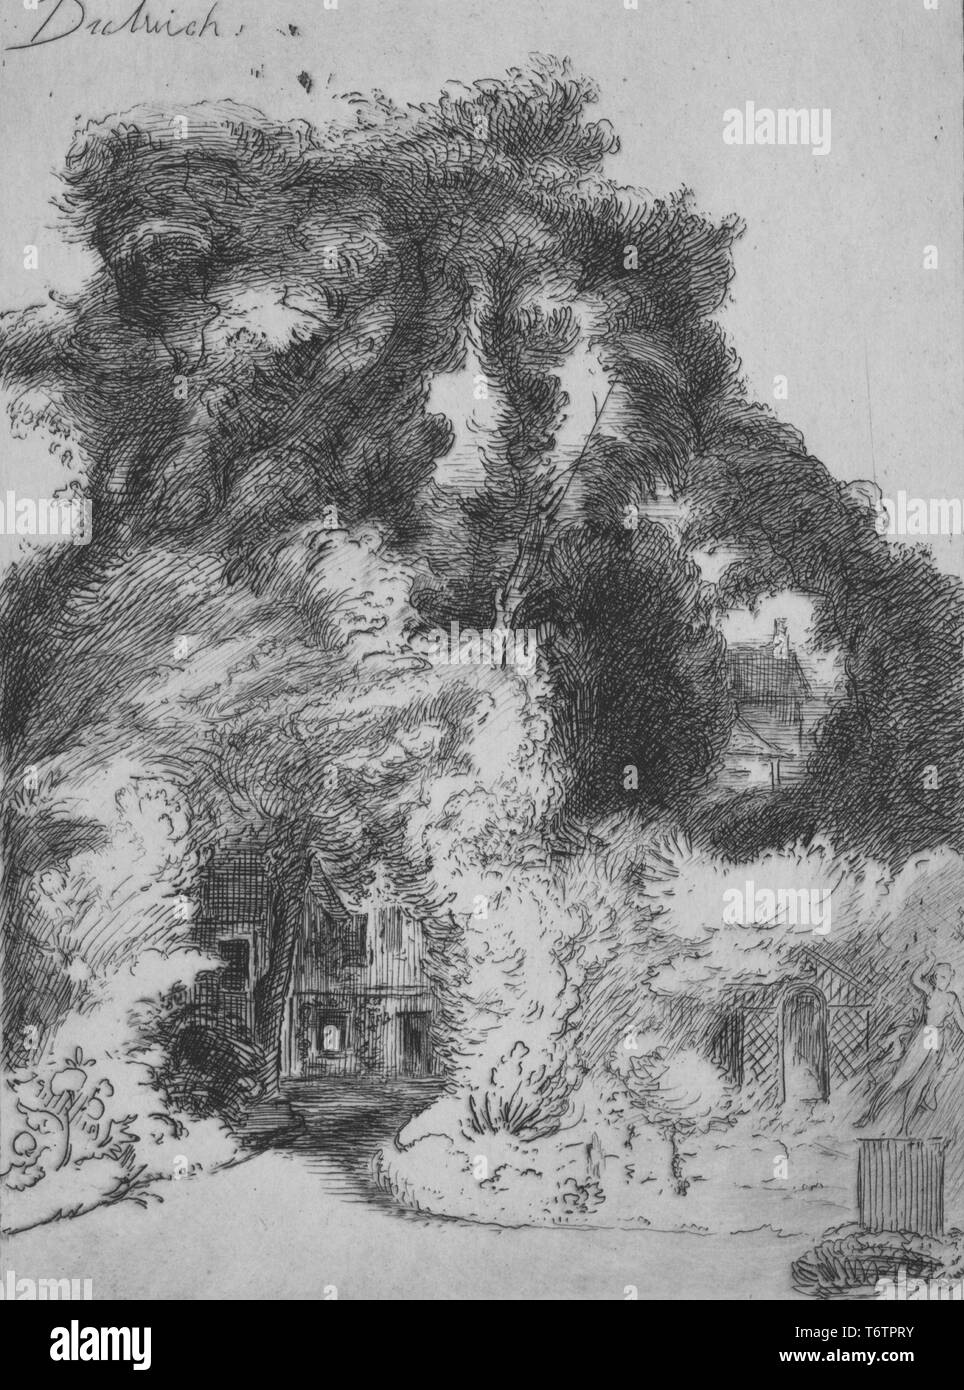 Black and white etching depicting a profusion of trees and vegetation, with an arch over a path leading to a multistory building that is visible in the background; titled 'Jardin de l'Auberge de Dulwich' (the Gardens of the Dulwich Inn); signed and numbered, with the notation 'Dulwich' visible in the top left corner, by the illustrator Felix Bracquemond, 1871. From the New York Public Library. () Stock Photo